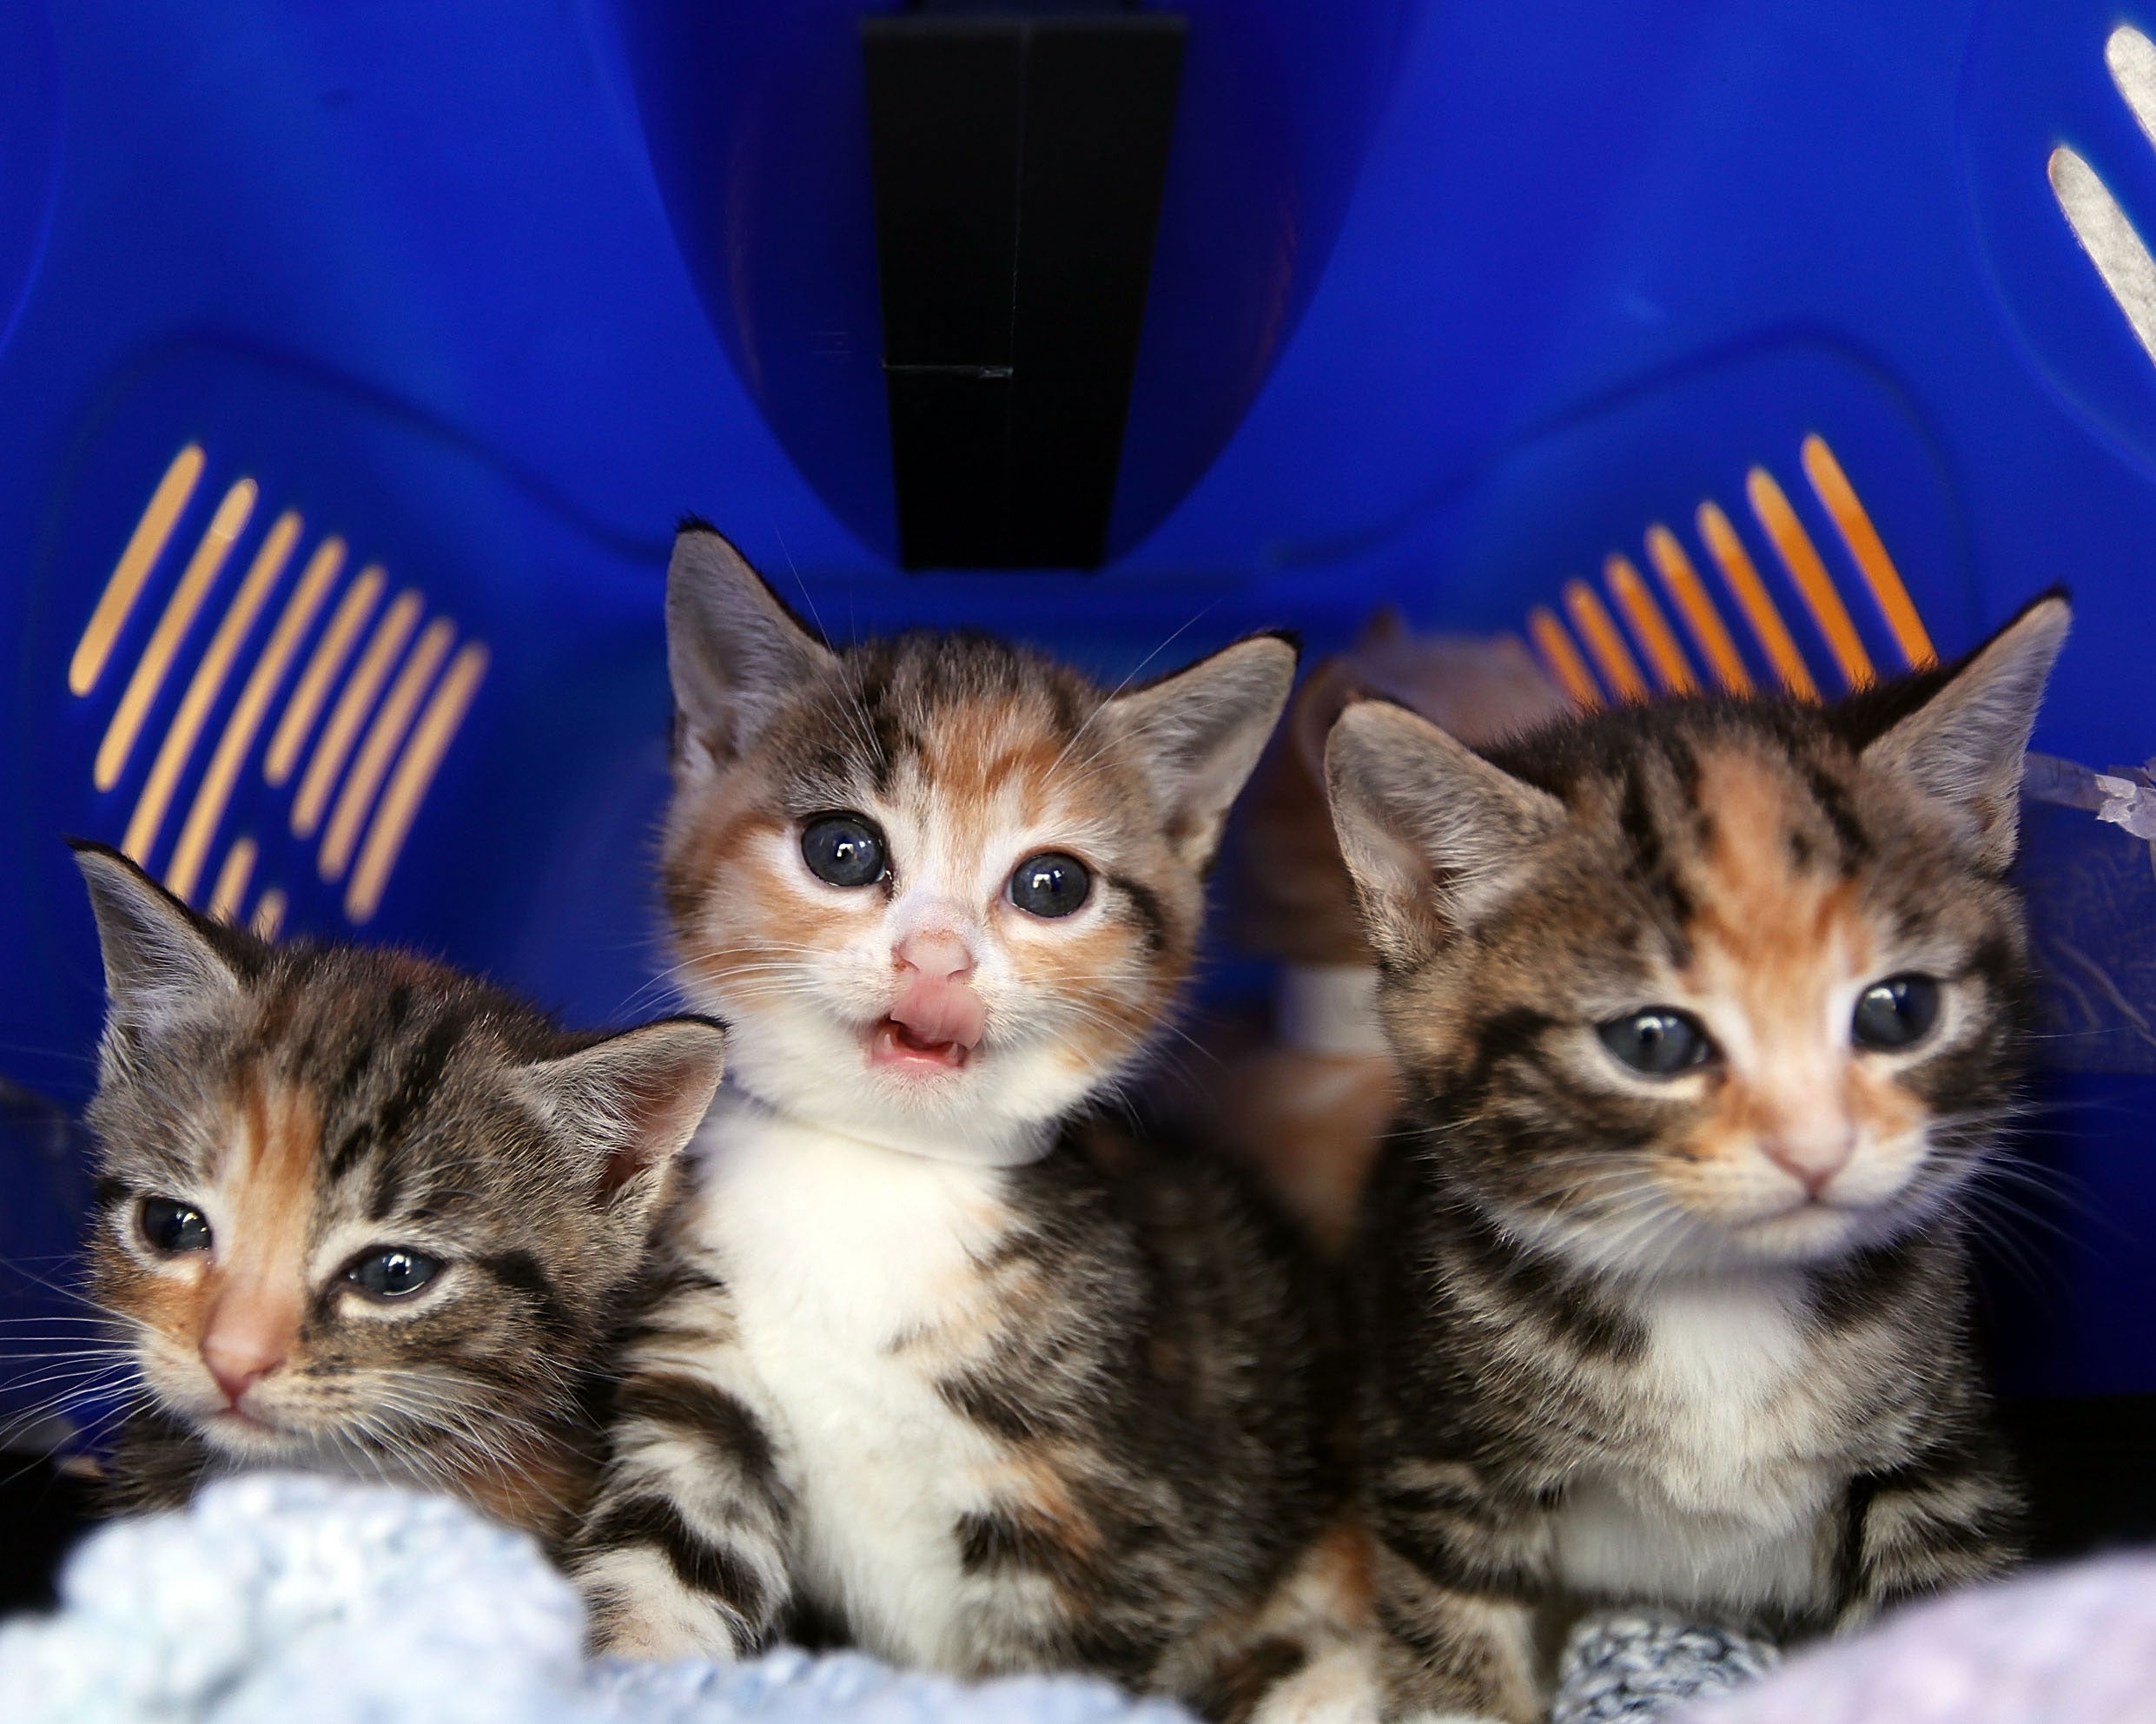 The RSPCA has confirmed reports of kittens being sold on Facebook as 'bait' are untrue